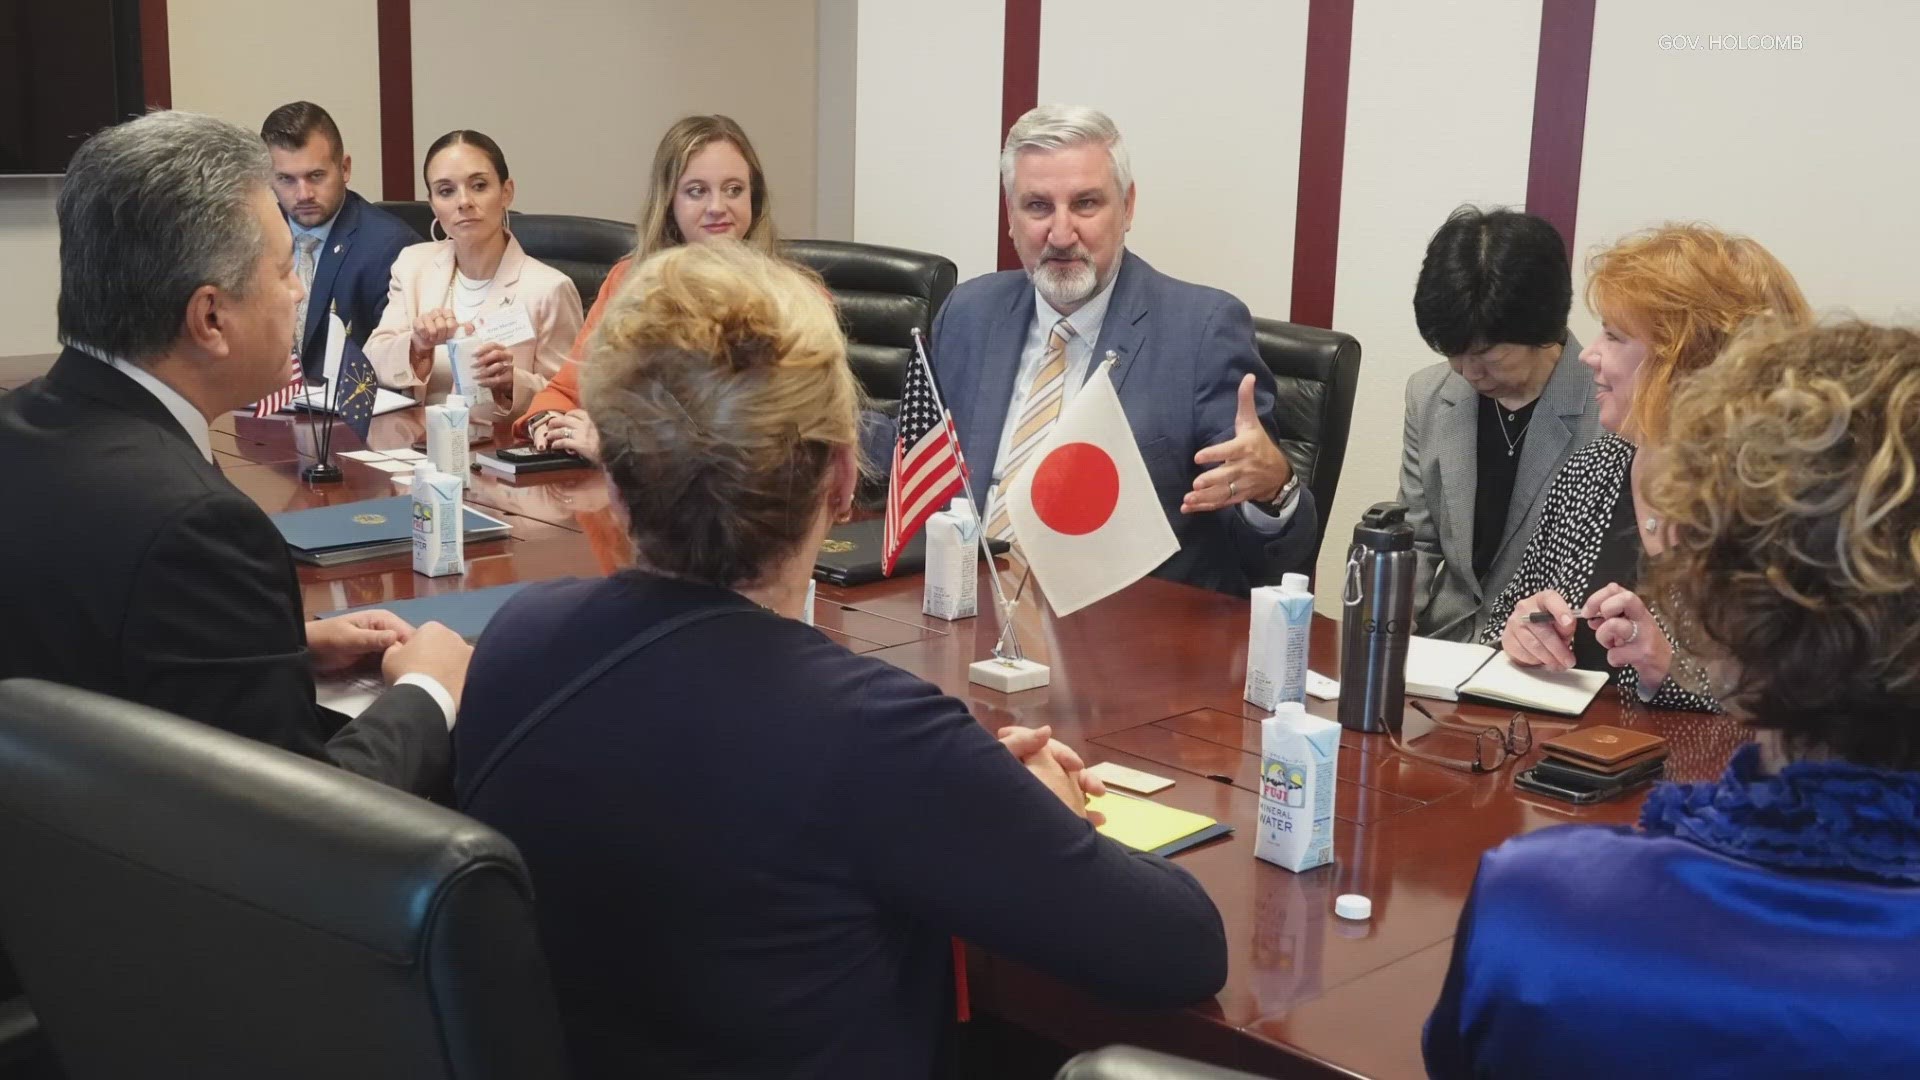 Indiana is actually home to more than 300 Japanese companies that employ more than 55-thousand Hoosiers. This is the governor's 16th foreign trip.